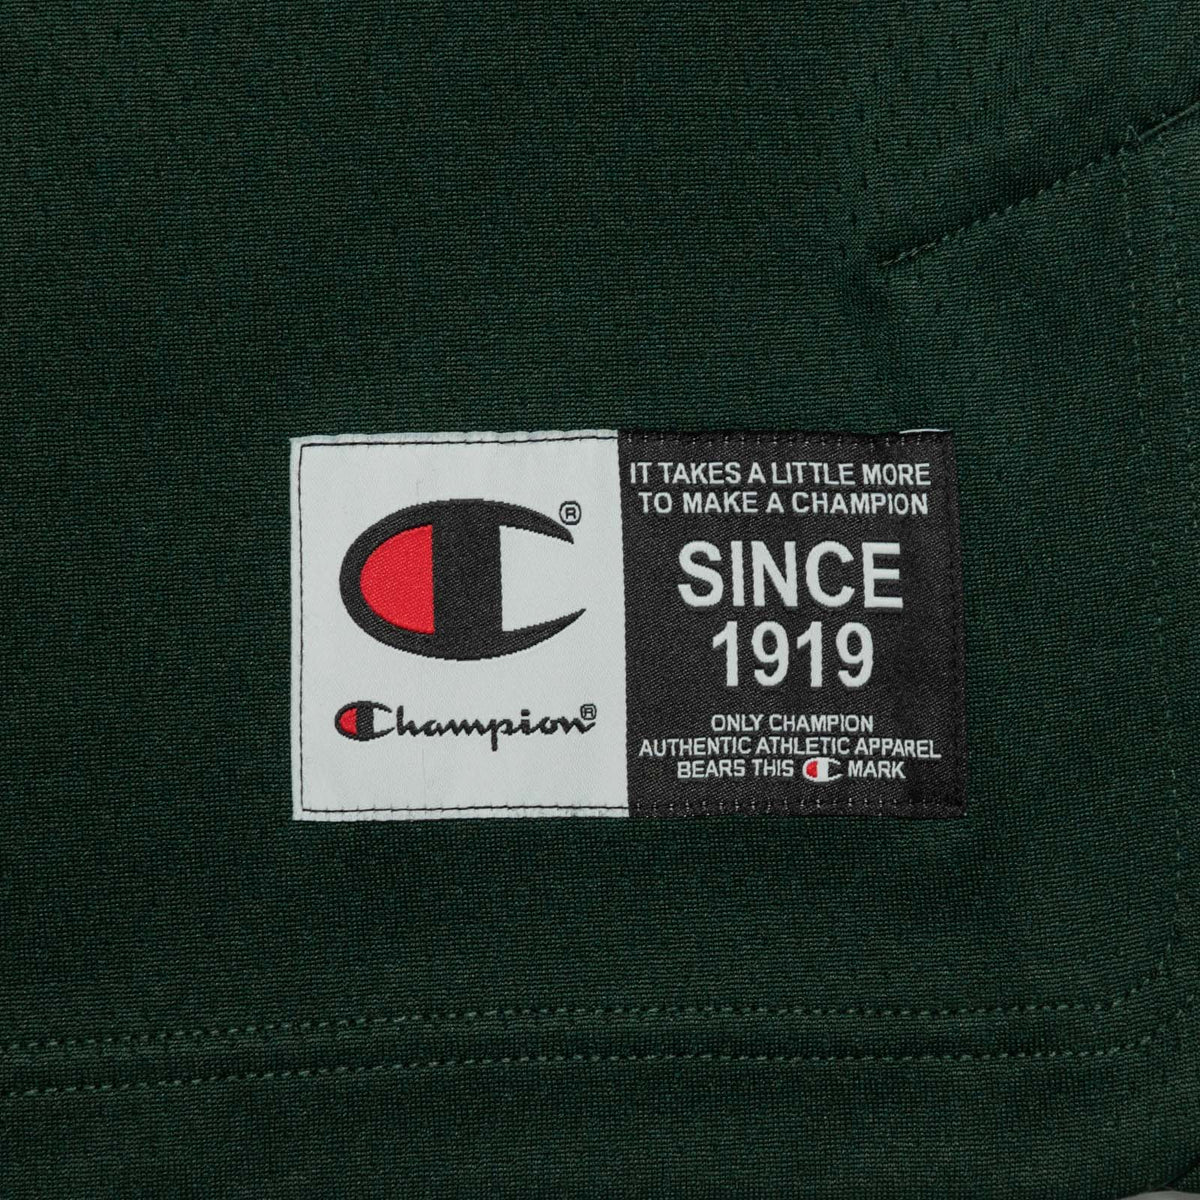 Clubhouse Basketball Jersey - Green